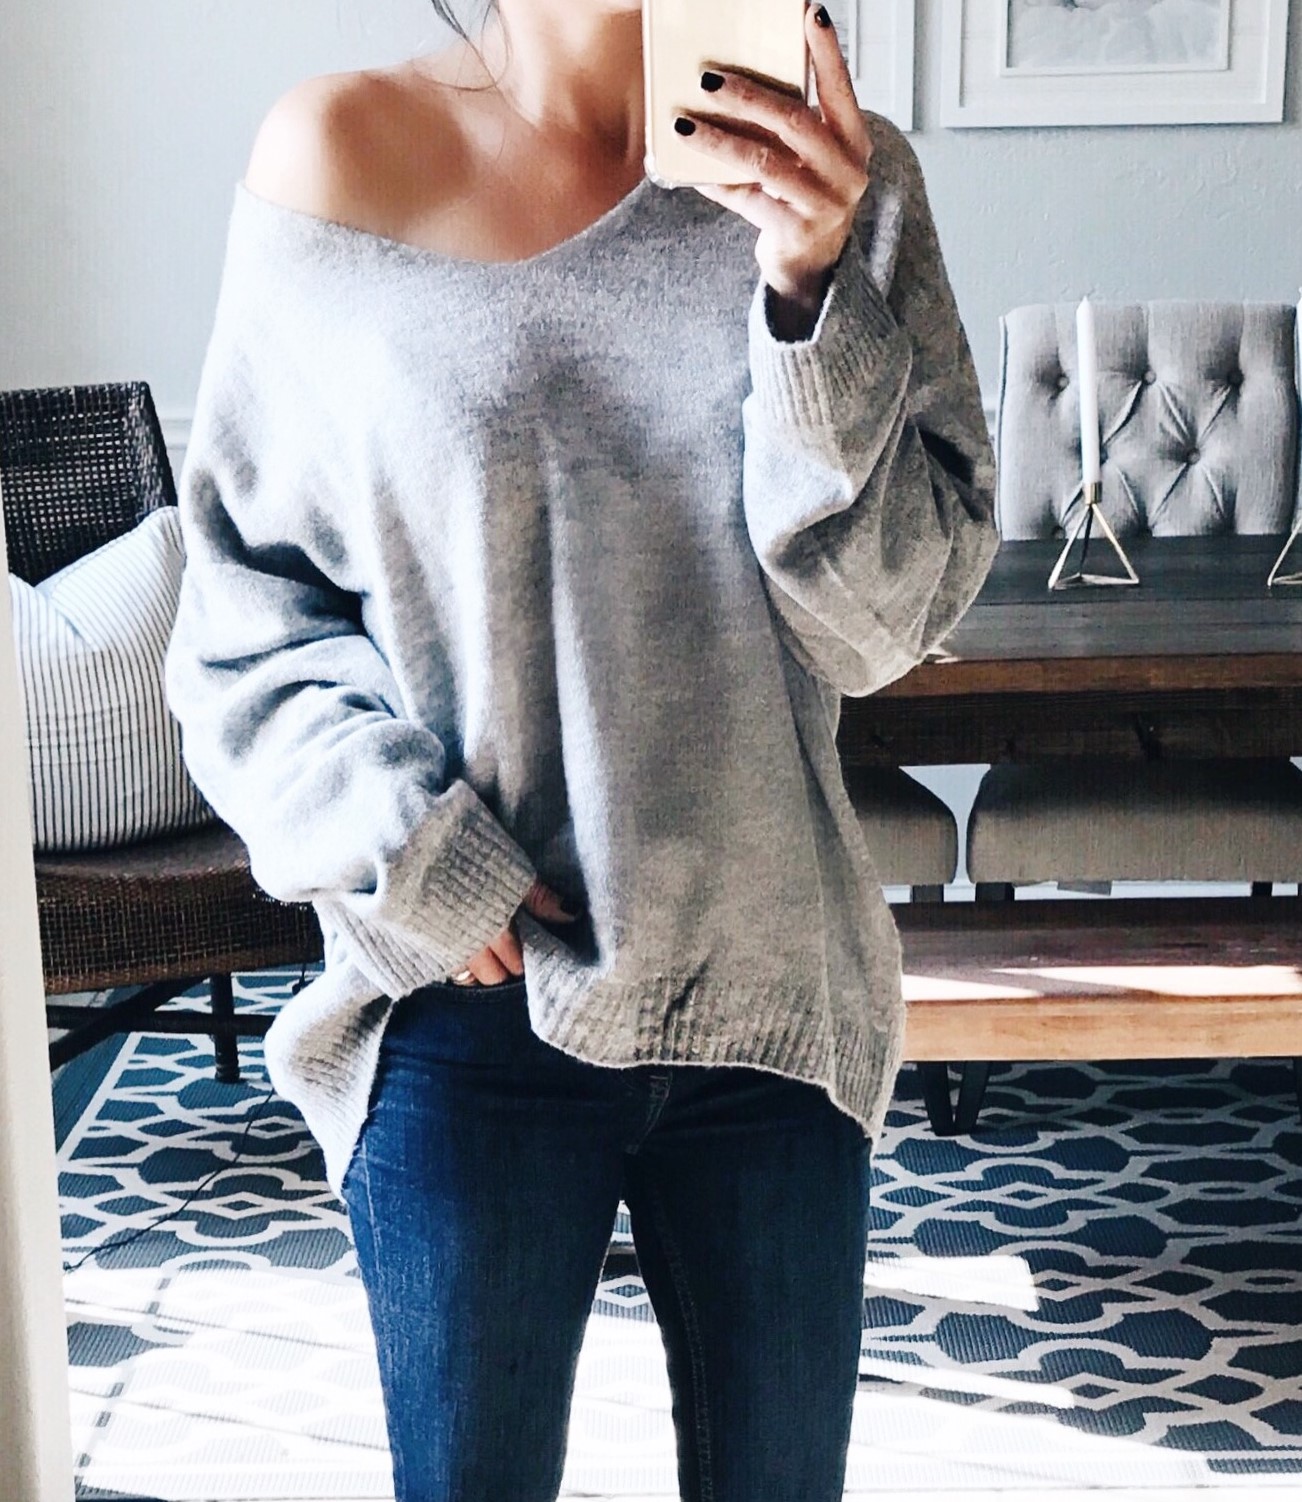 The $20 Sweater That You Need